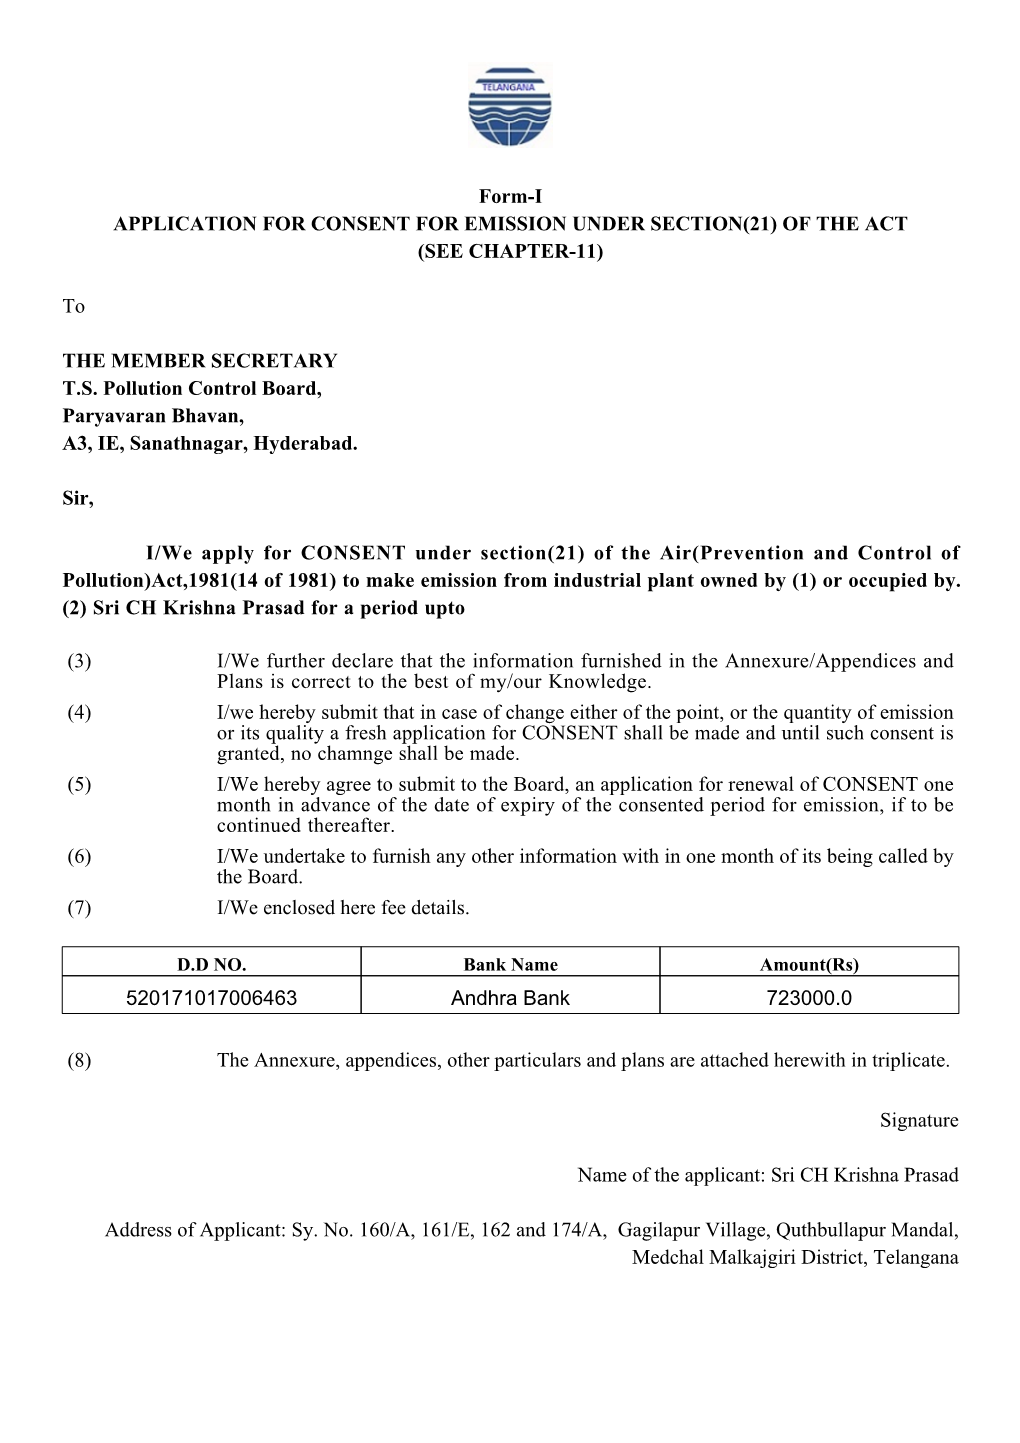 Form-I APPLICATION for CONSENT for EMISSION UNDER SECTION(21) of the ACT (SEE CHAPTER-11) to the MEMBER SECRETARY T.S. Pollution